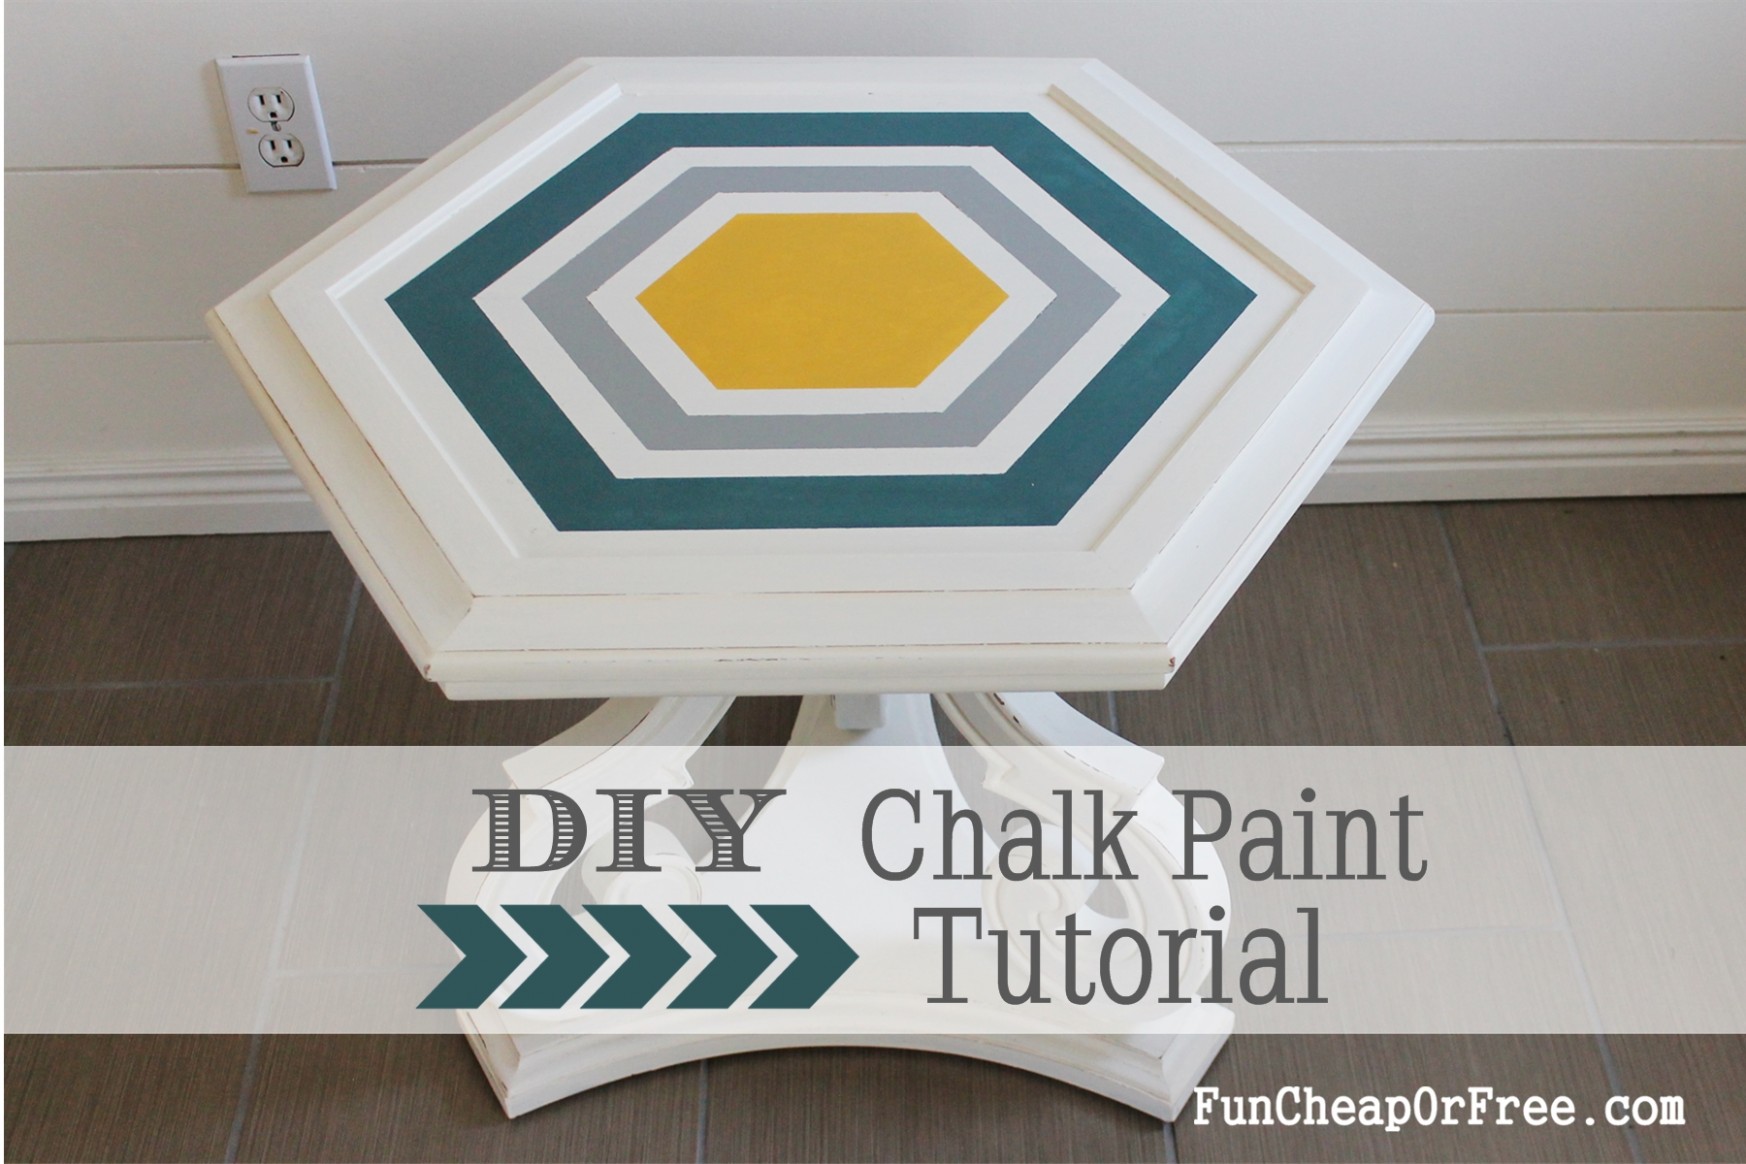 Diy Chalk Paint + How To Refinish Furniture! Fun Cheap Or Free Where Do You Buy Chalk Paint For Furniture